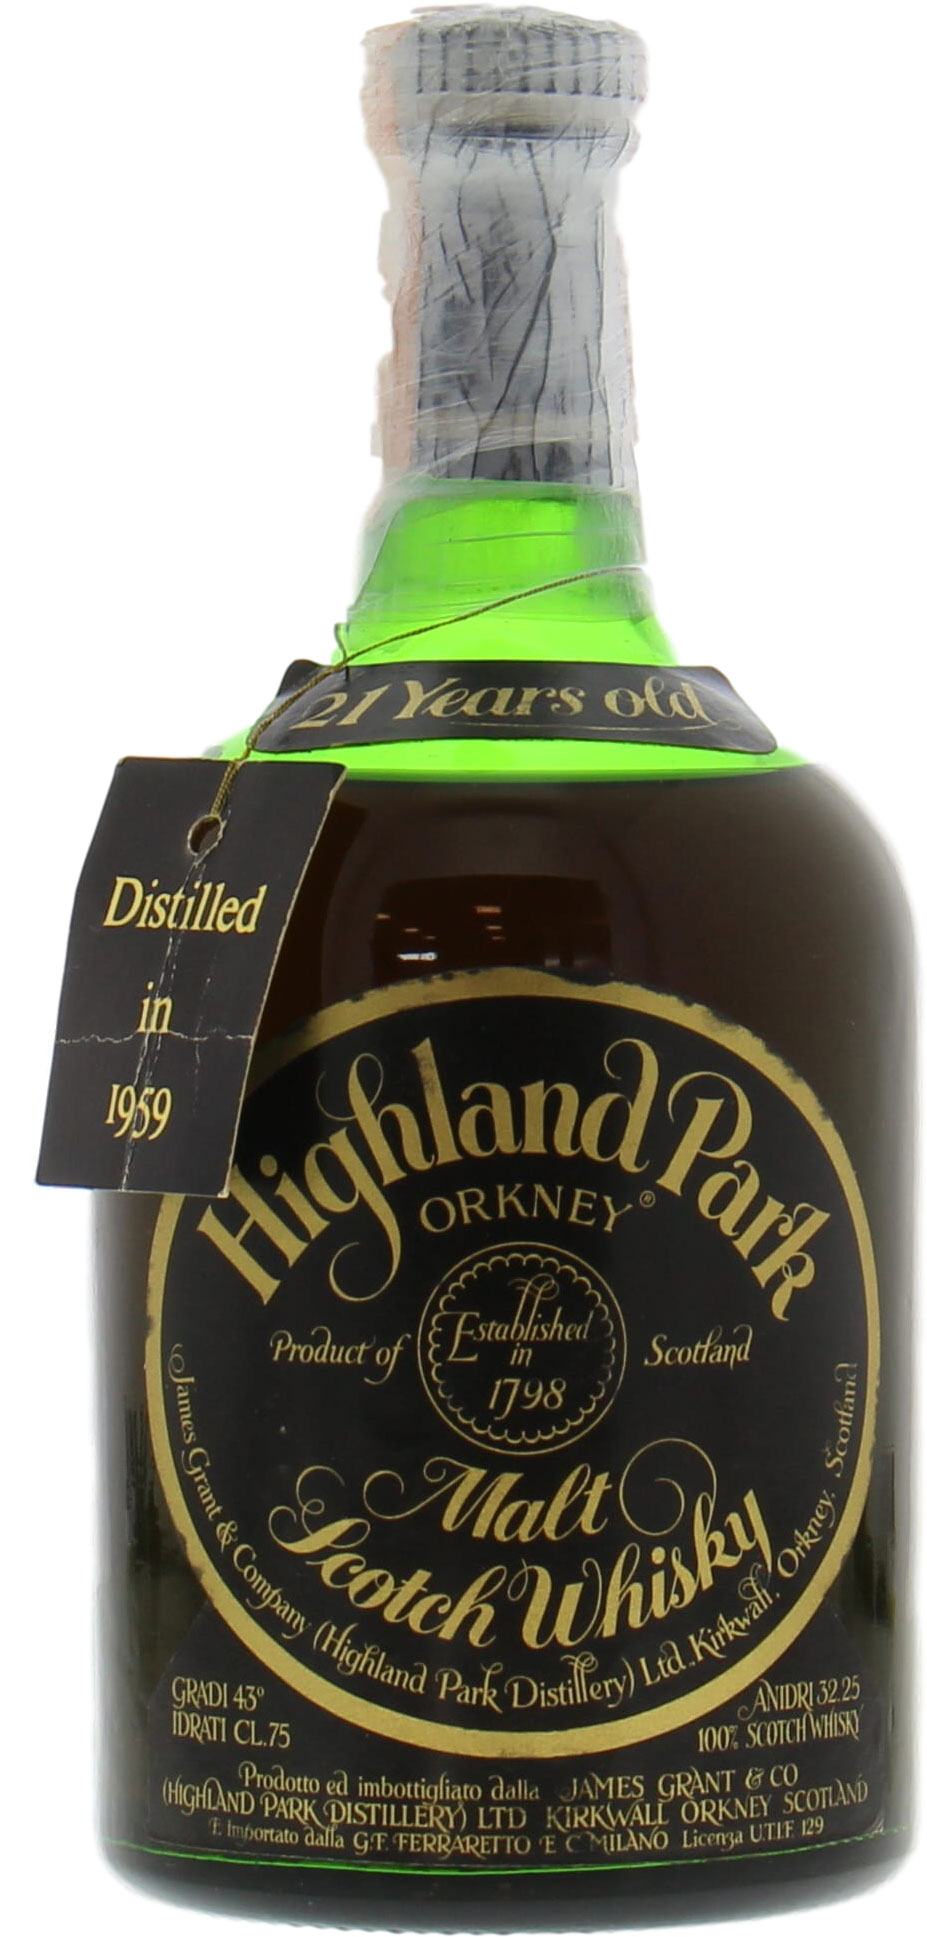 Highland Park - 1959 21 Years Old 43% 1959